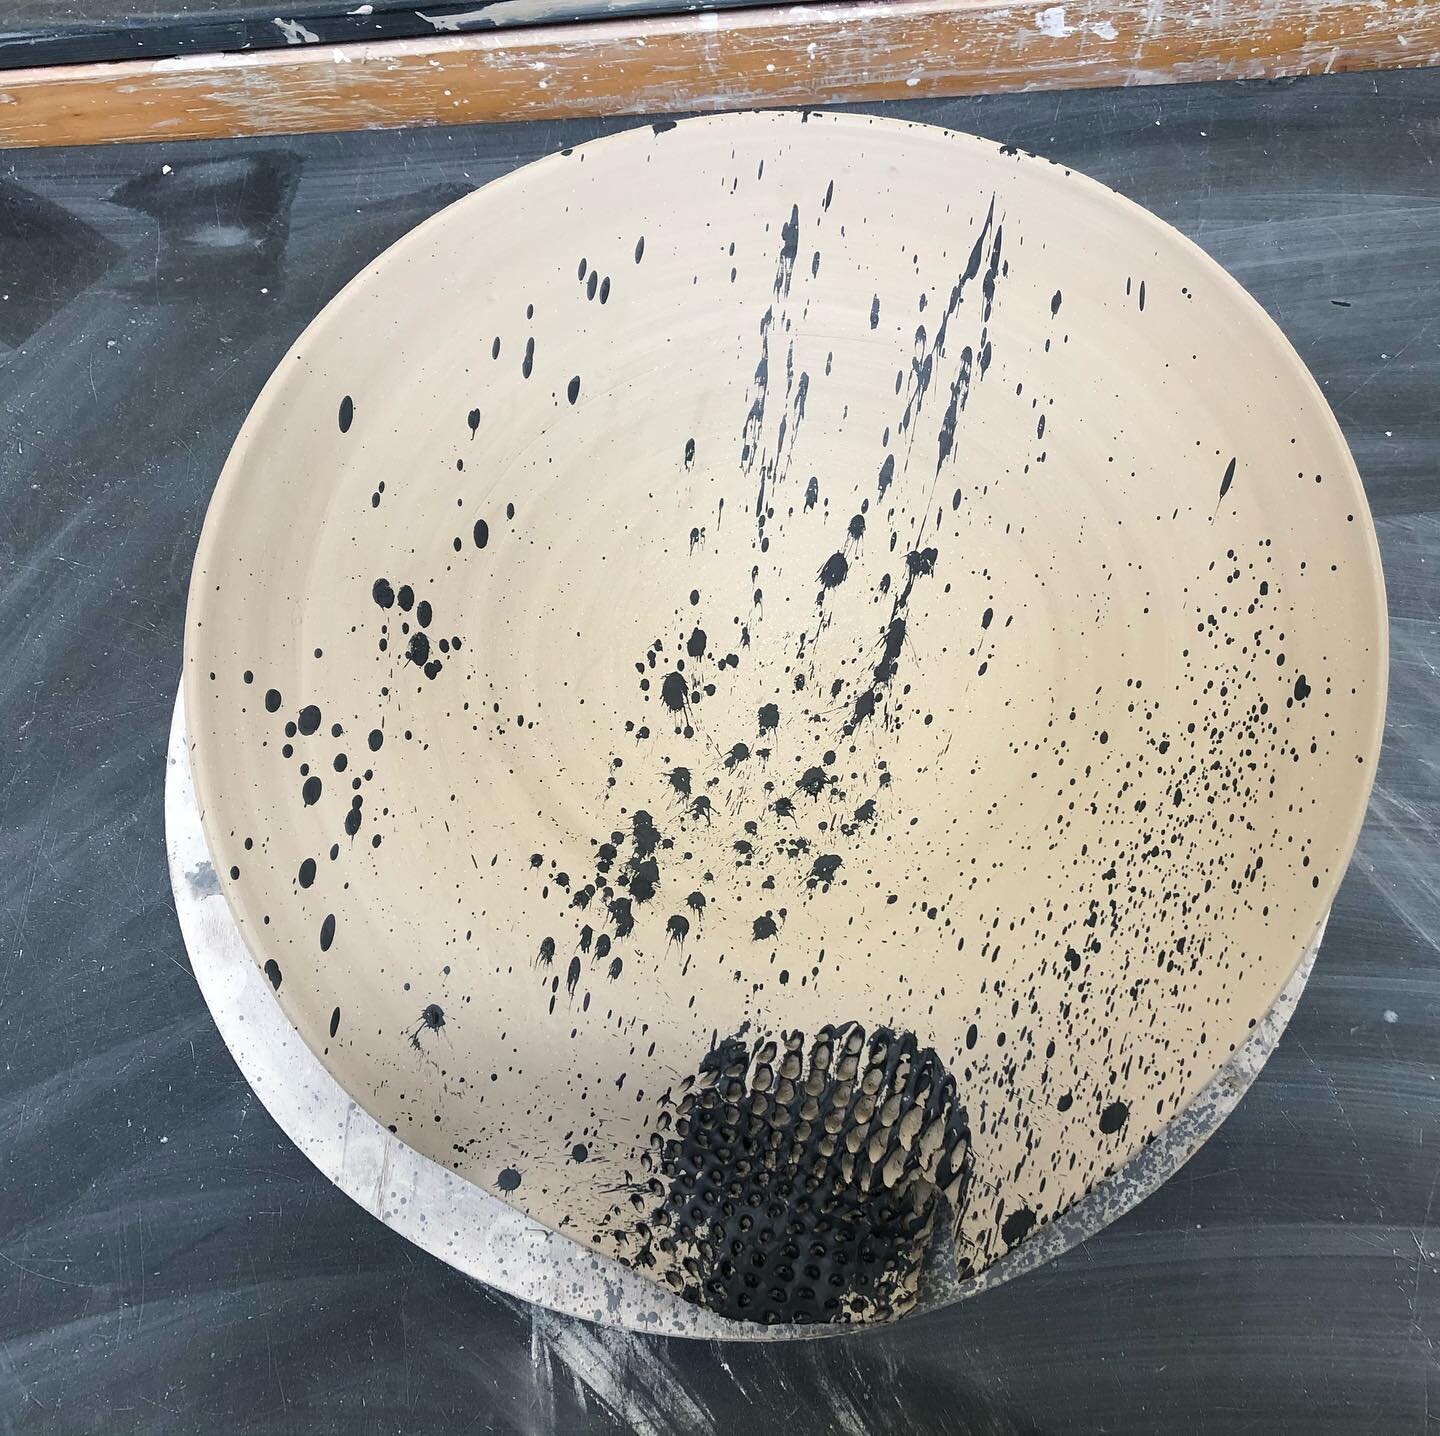 This vessel will sit for a long time drying, but hopefully the benefits will be clear when it has undergone the transformation. Patience is a virtue and necessity. #leneryden #Pgschoolcraftdesignuca  #ceramicartist #surreyartist #surreyguildofcraftsm